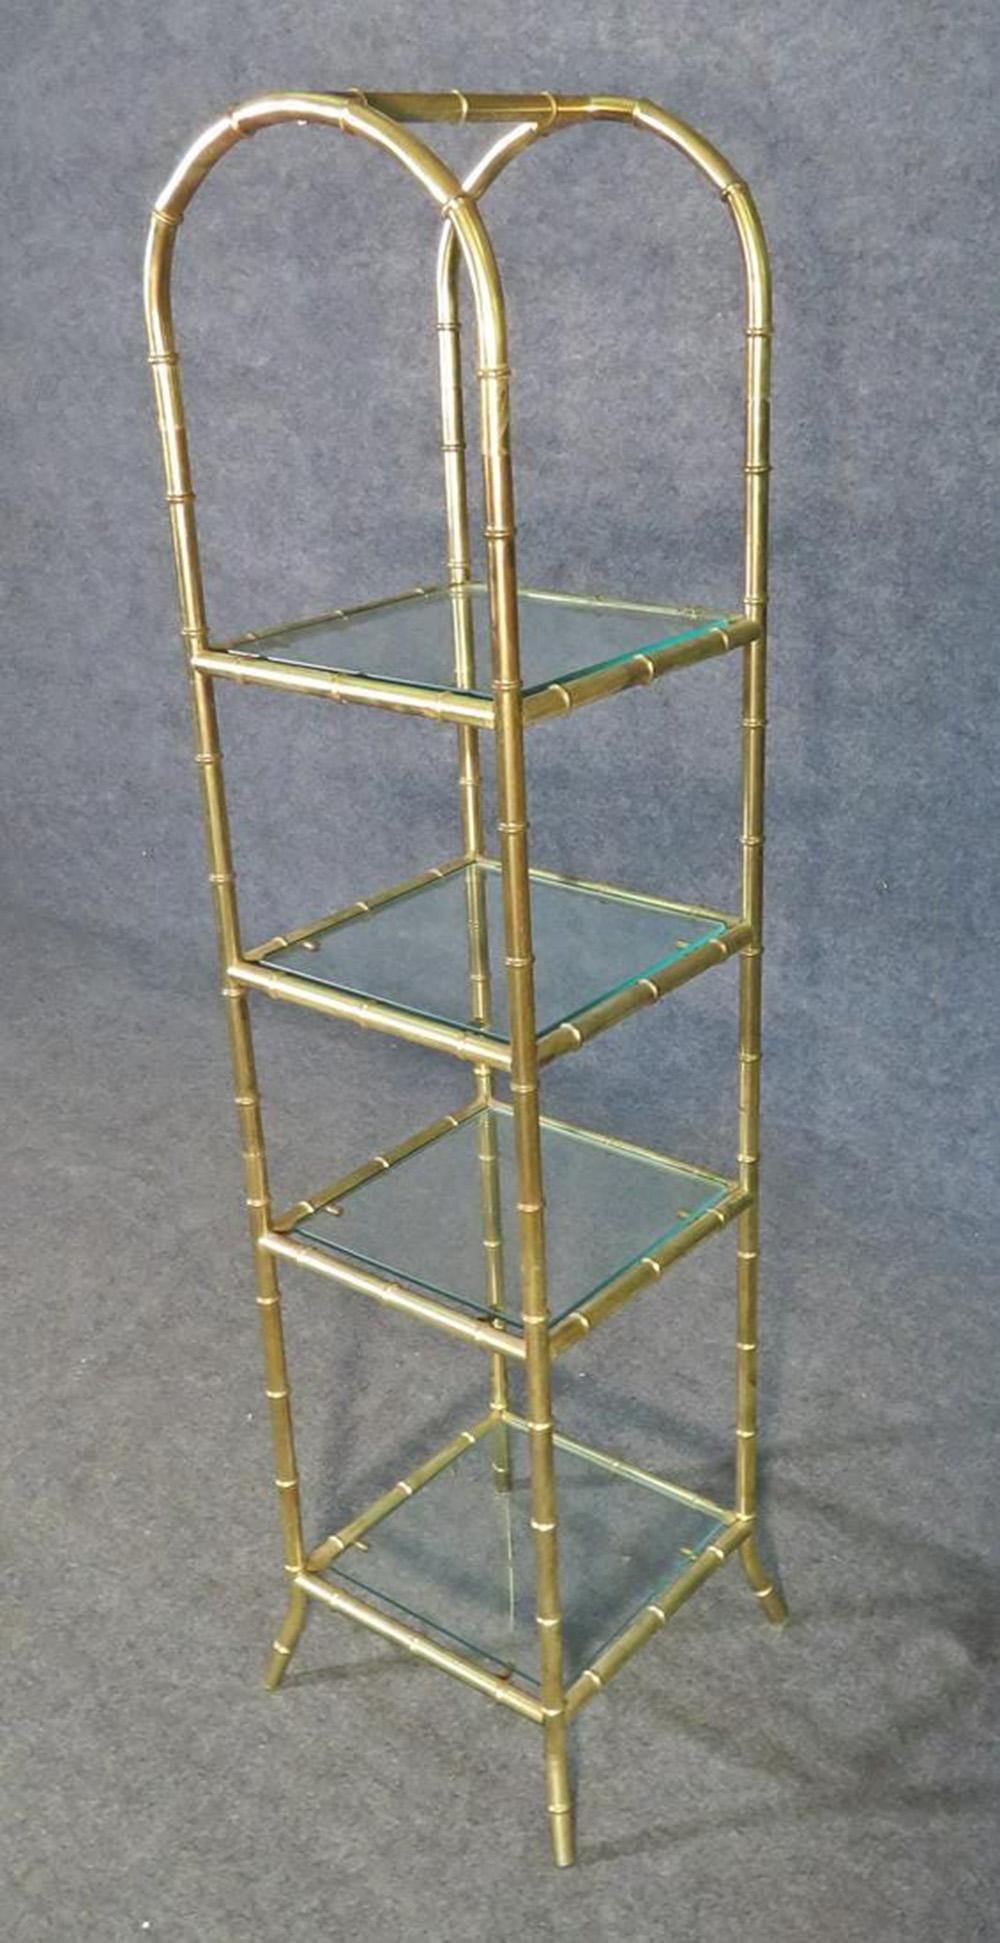 This is a gorgeous French 1950s era Bagues style or perhaps made by Bagues, petite etagere. Perfect for use in a powder room or any other space requiring shelving with minimal space. The piece is in good original condition. The etagere measures 57